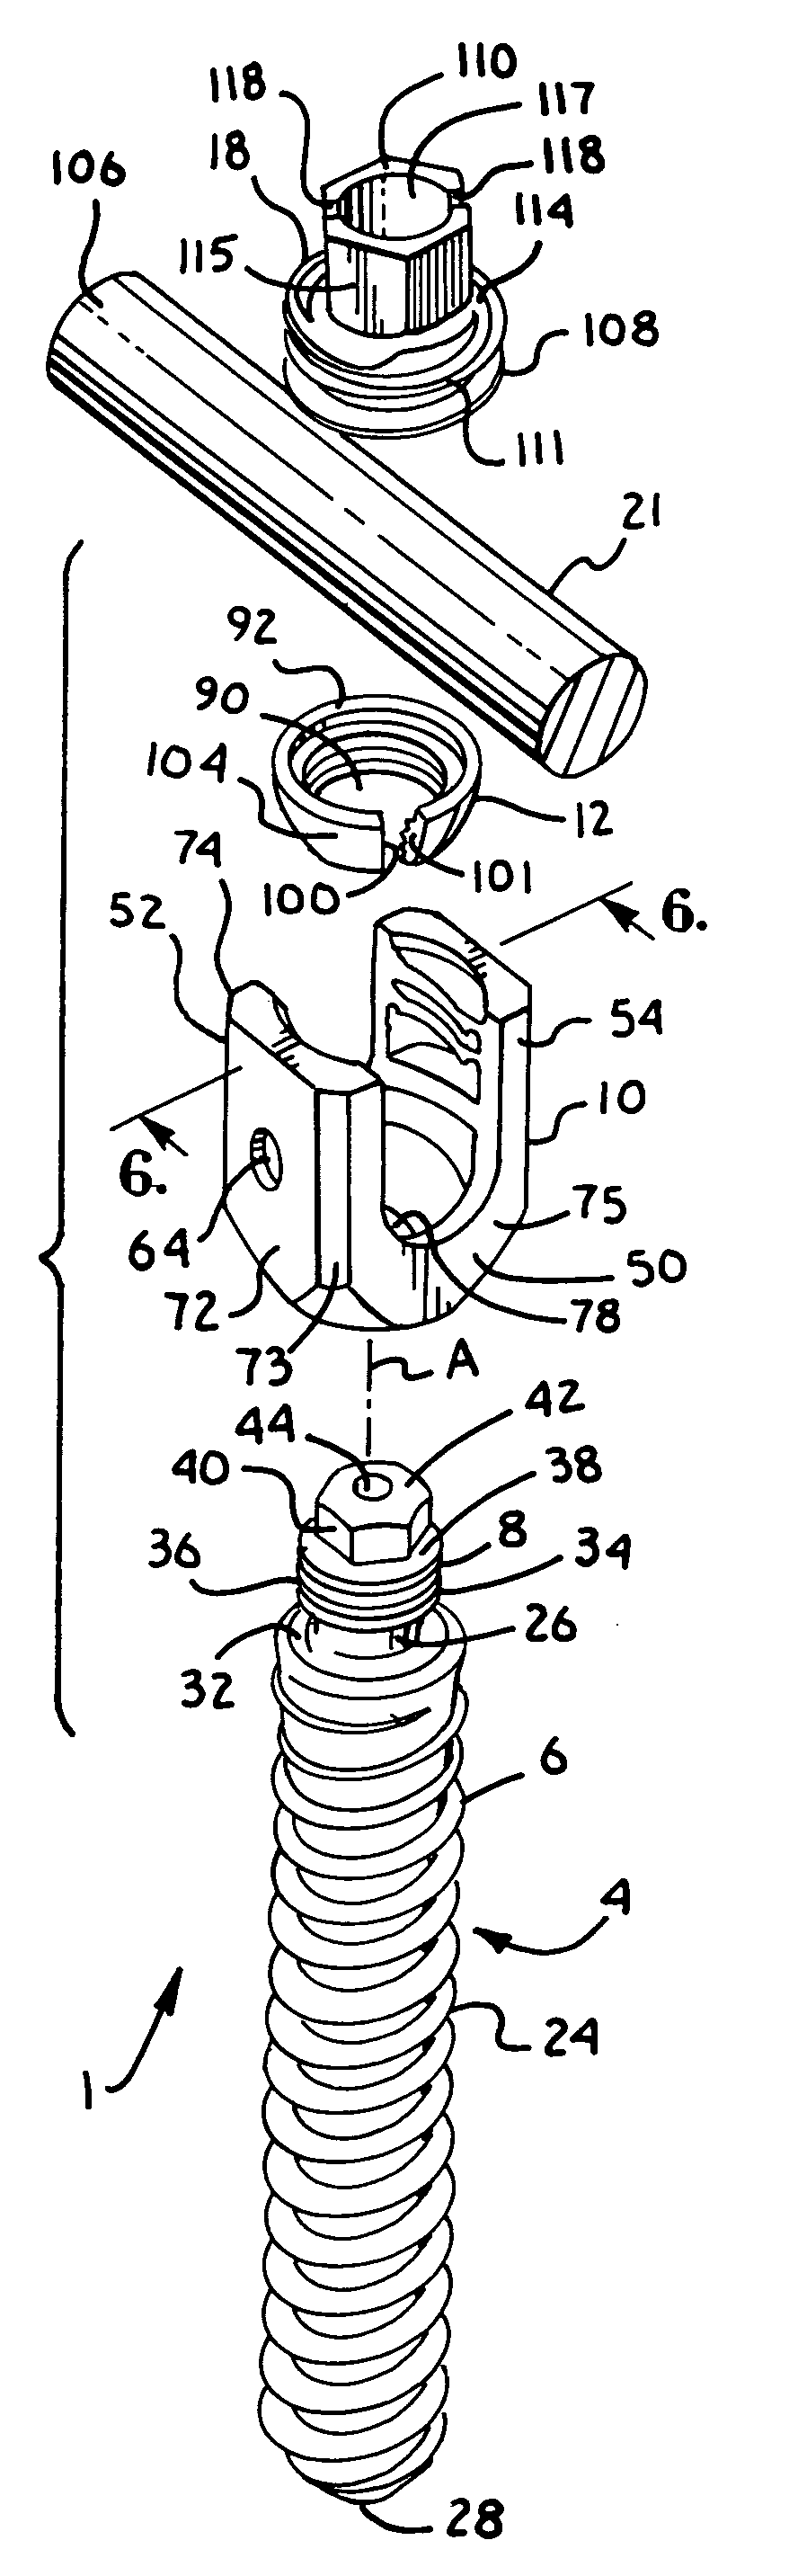 Polyaxial bone screw with discontinuous helically wound capture connection